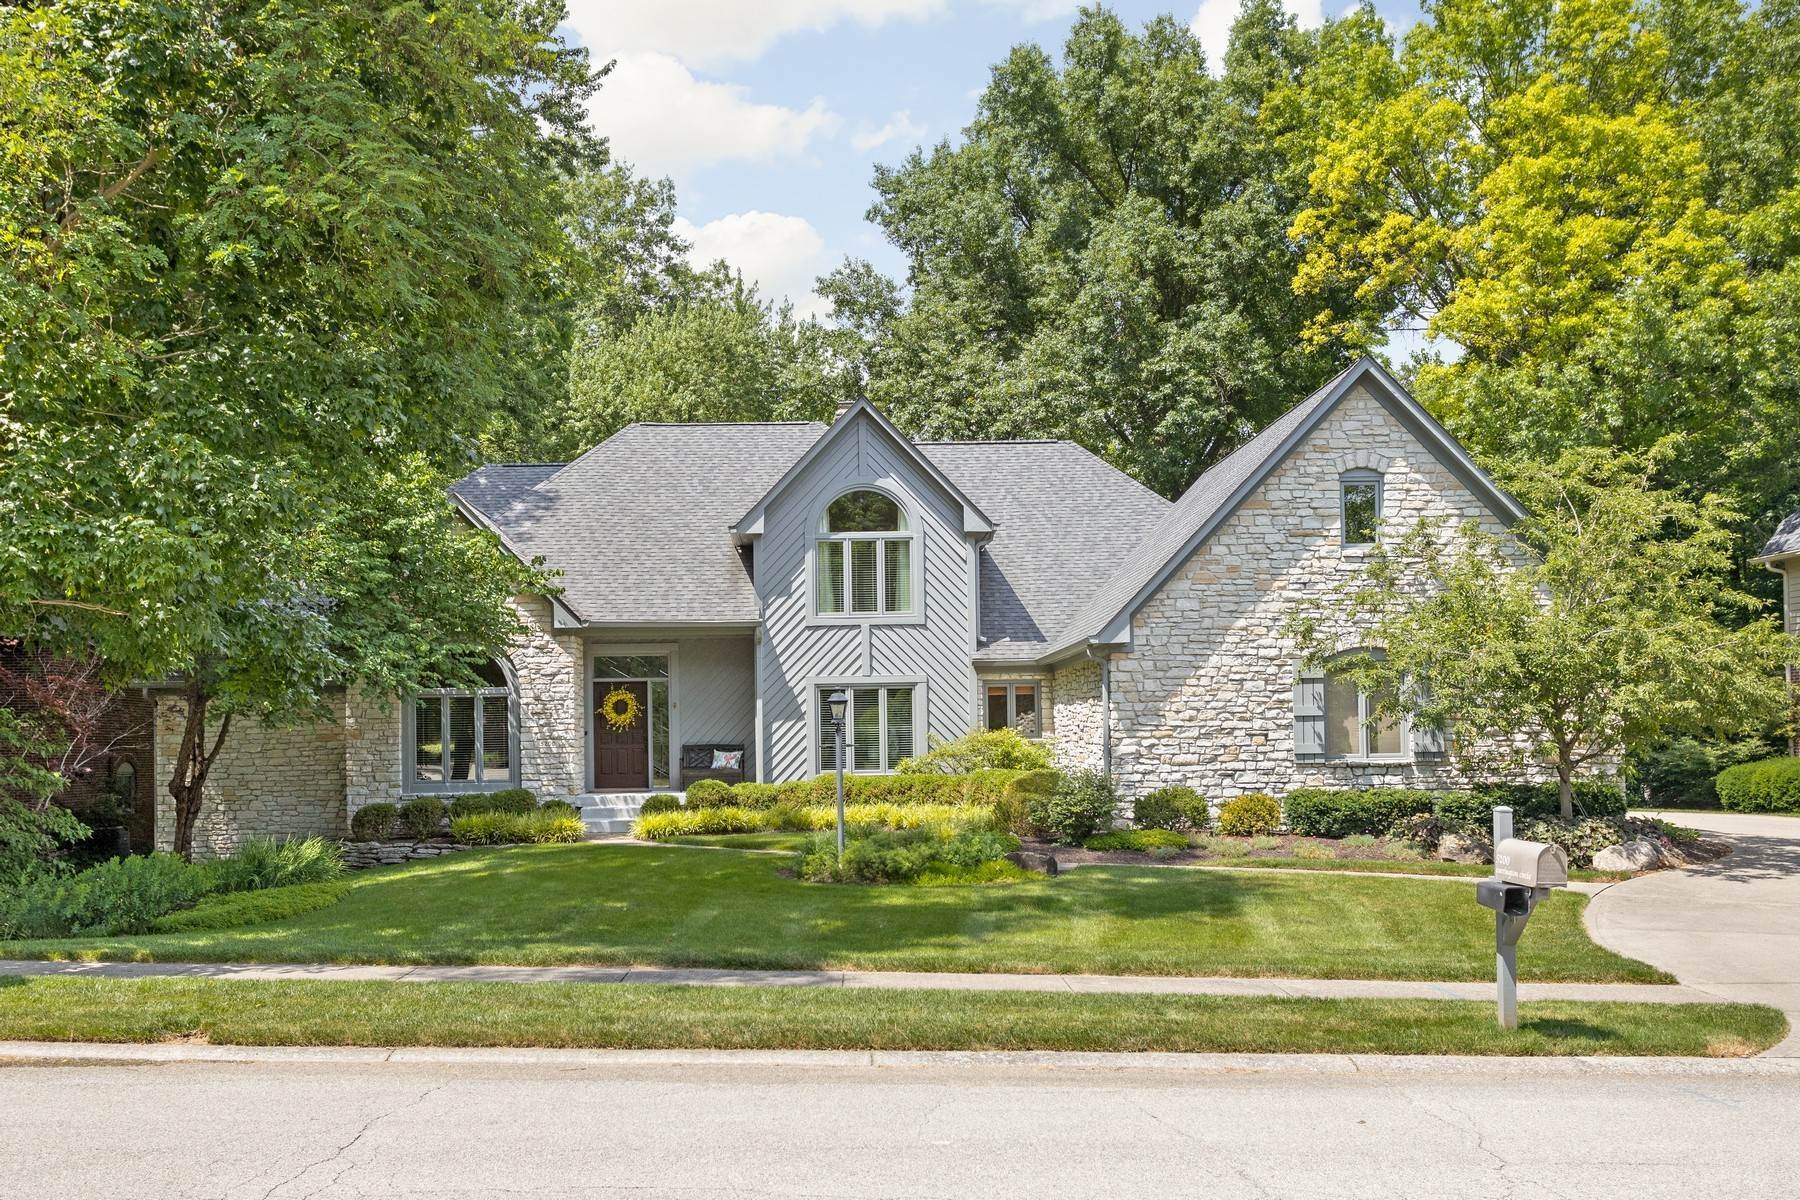 Single Family Homes for Sale at Stunning Home on Gorgeous Lot 5200 Carrington Circle Carmel, Indiana 46033 United States